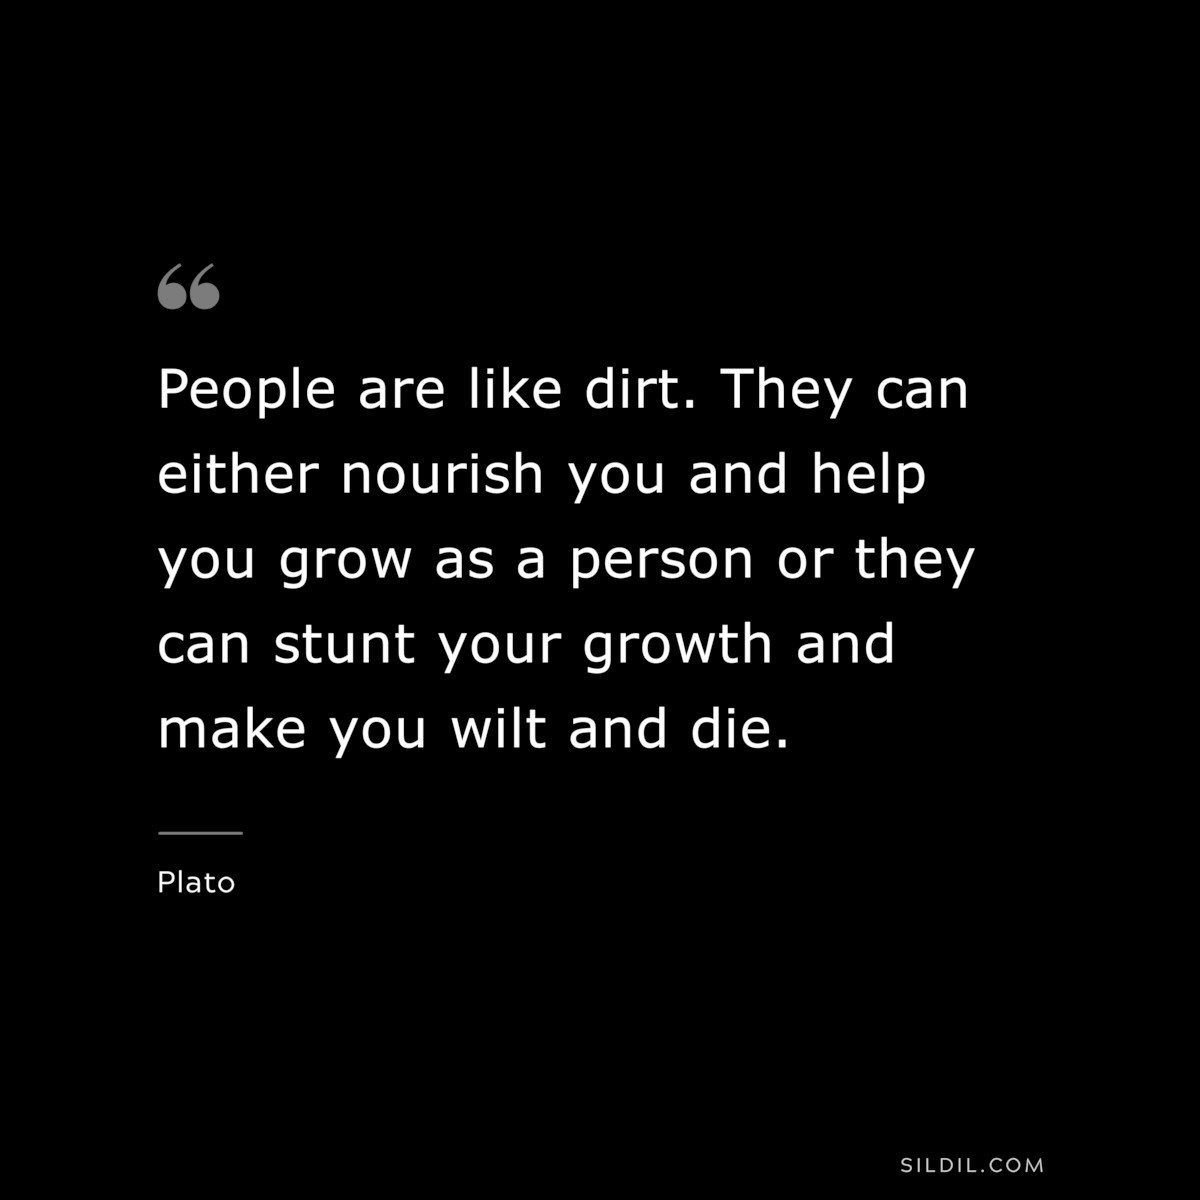 People are like dirt. They can either nourish you and help you grow as a person or they can stunt your growth and make you wilt and die. ― Plato